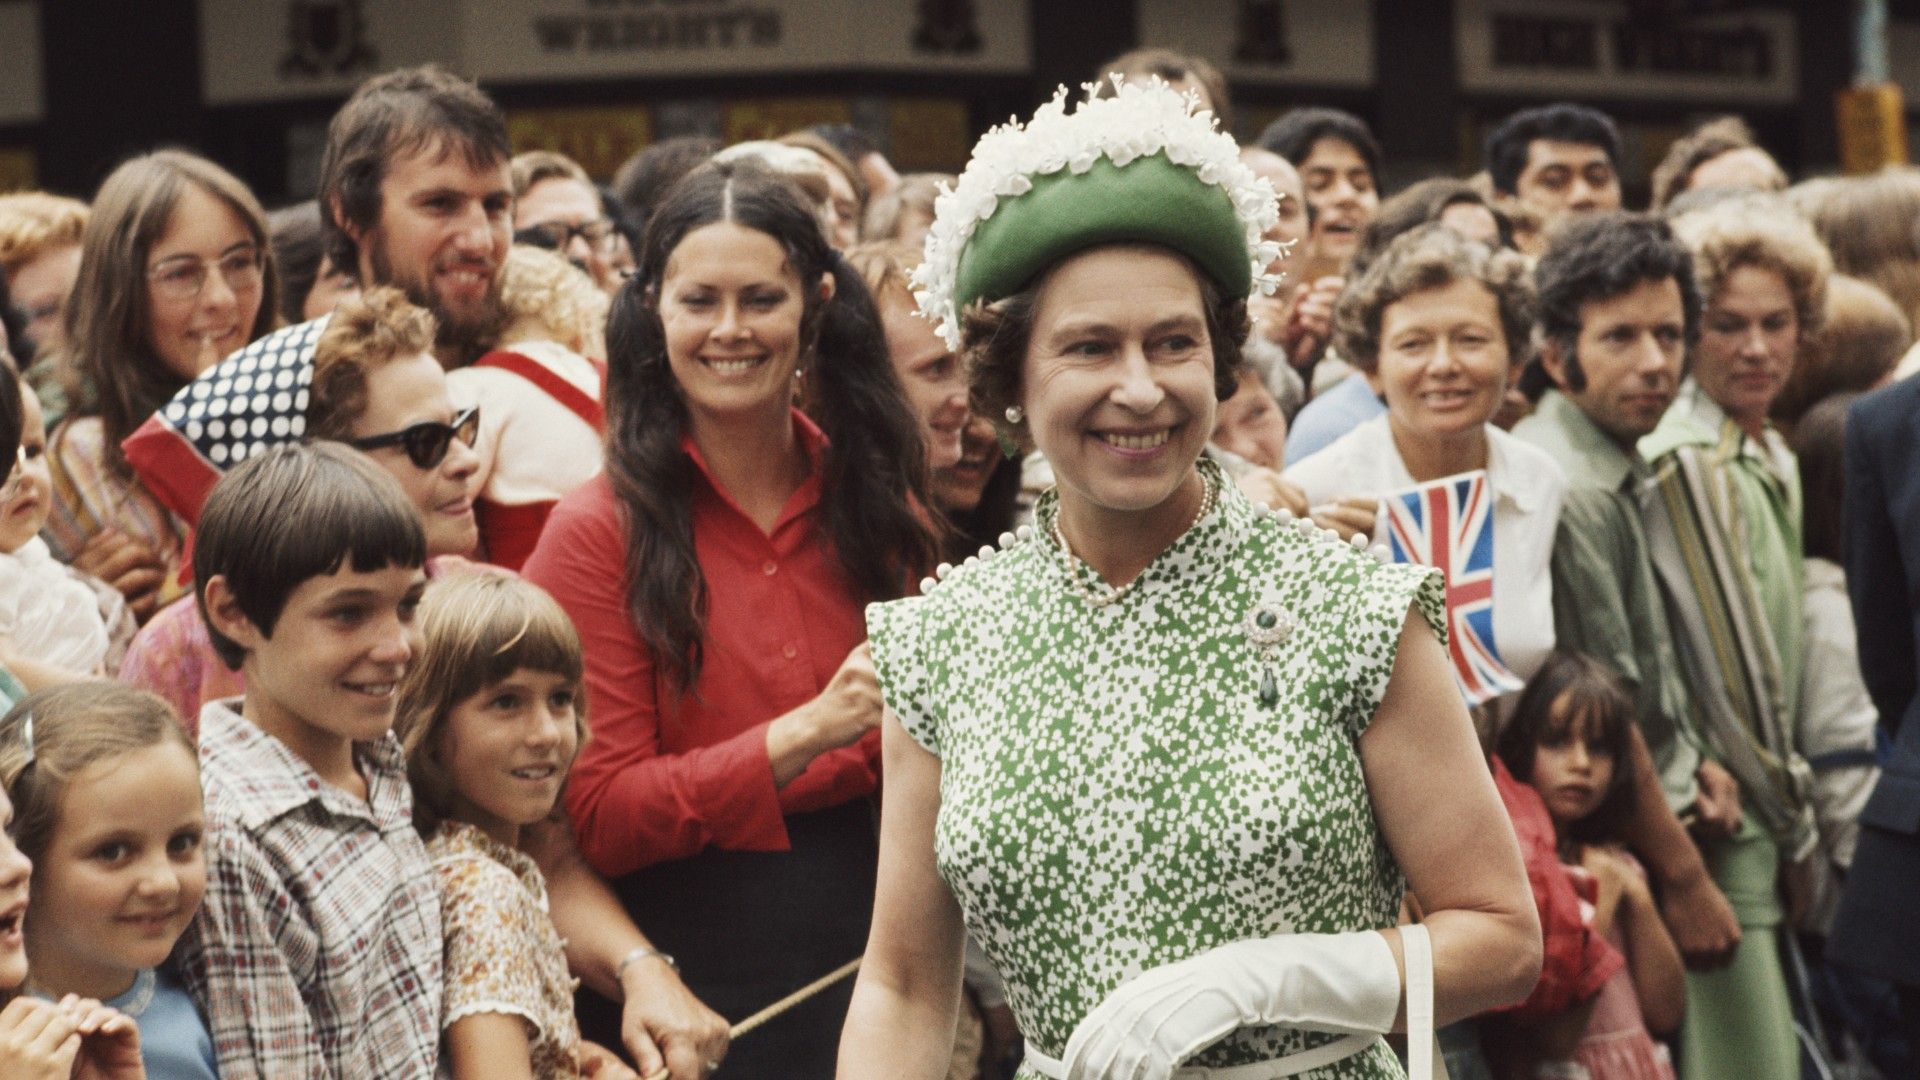 <p>                     The Queen was seen beaming from ear-to-ear on a walkabout during an official visit to New Zealand in 1977, which was made to mark her Silver jubilee and 25 years since her accession to the throne.                   </p>                                      <p>                     The Queen was accompanied by her husband the Duke of Edinburgh for this tour – and interestingly, the schedule they undertook actually mirrored that of the tour they took in 1953-1954, when Elizabeth first came to the throne, as an homage to her 25th year on the throne.                   </p>                                      <p>                     Everywhere the pair went they were greeted with adoring crowds lining the streets, ensuring it was a special moment for the royal couple.                   </p>